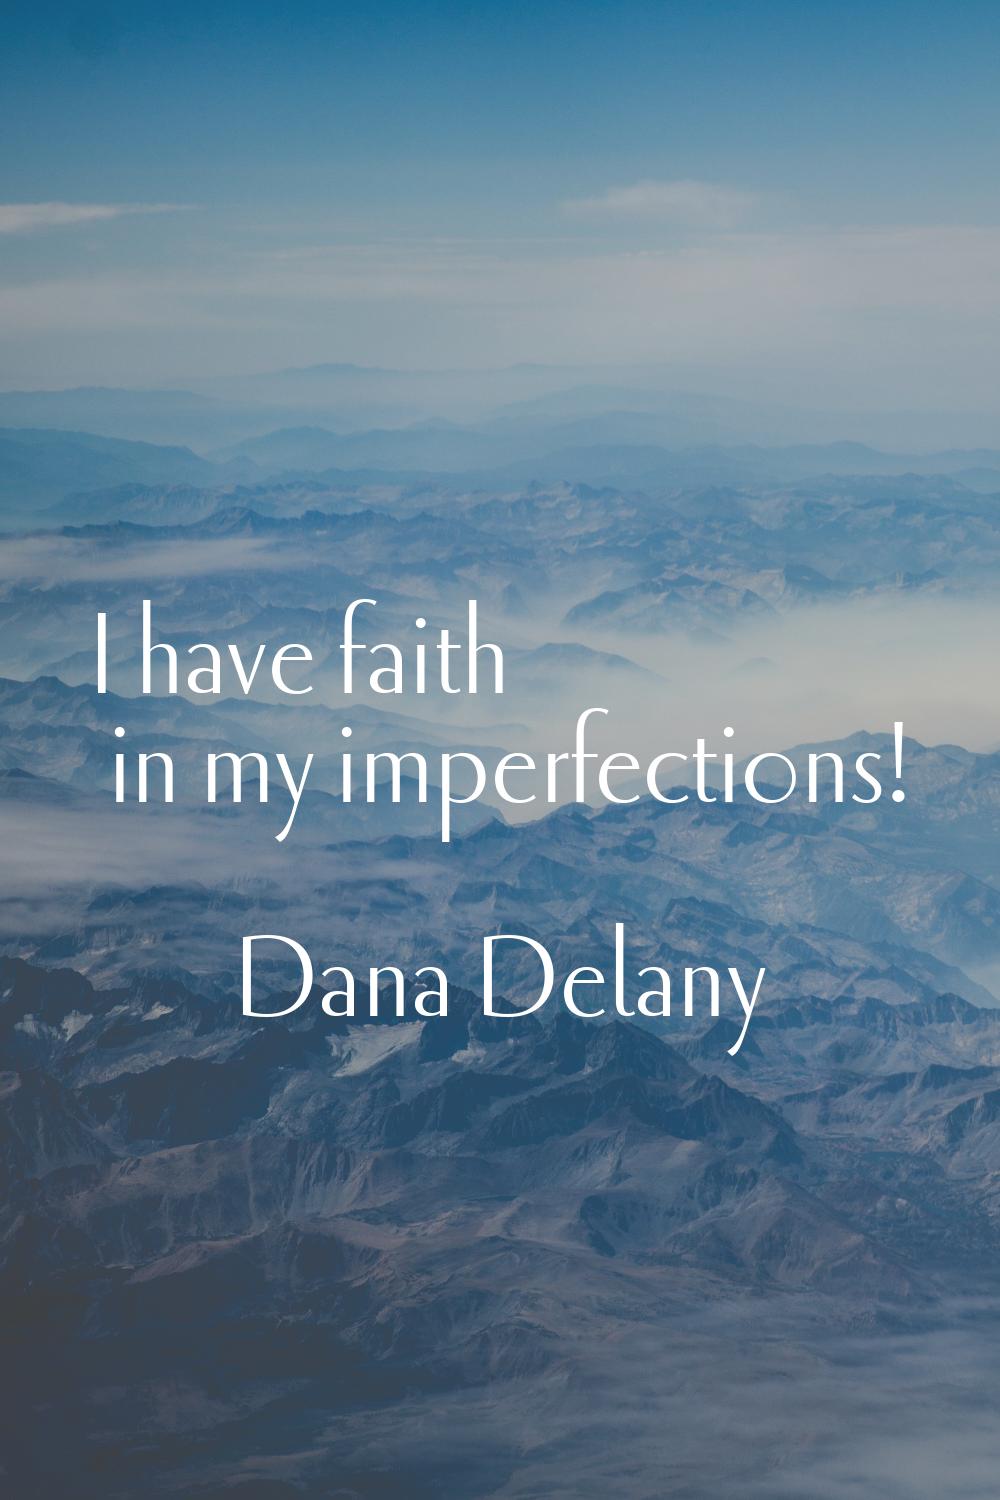 I have faith in my imperfections!